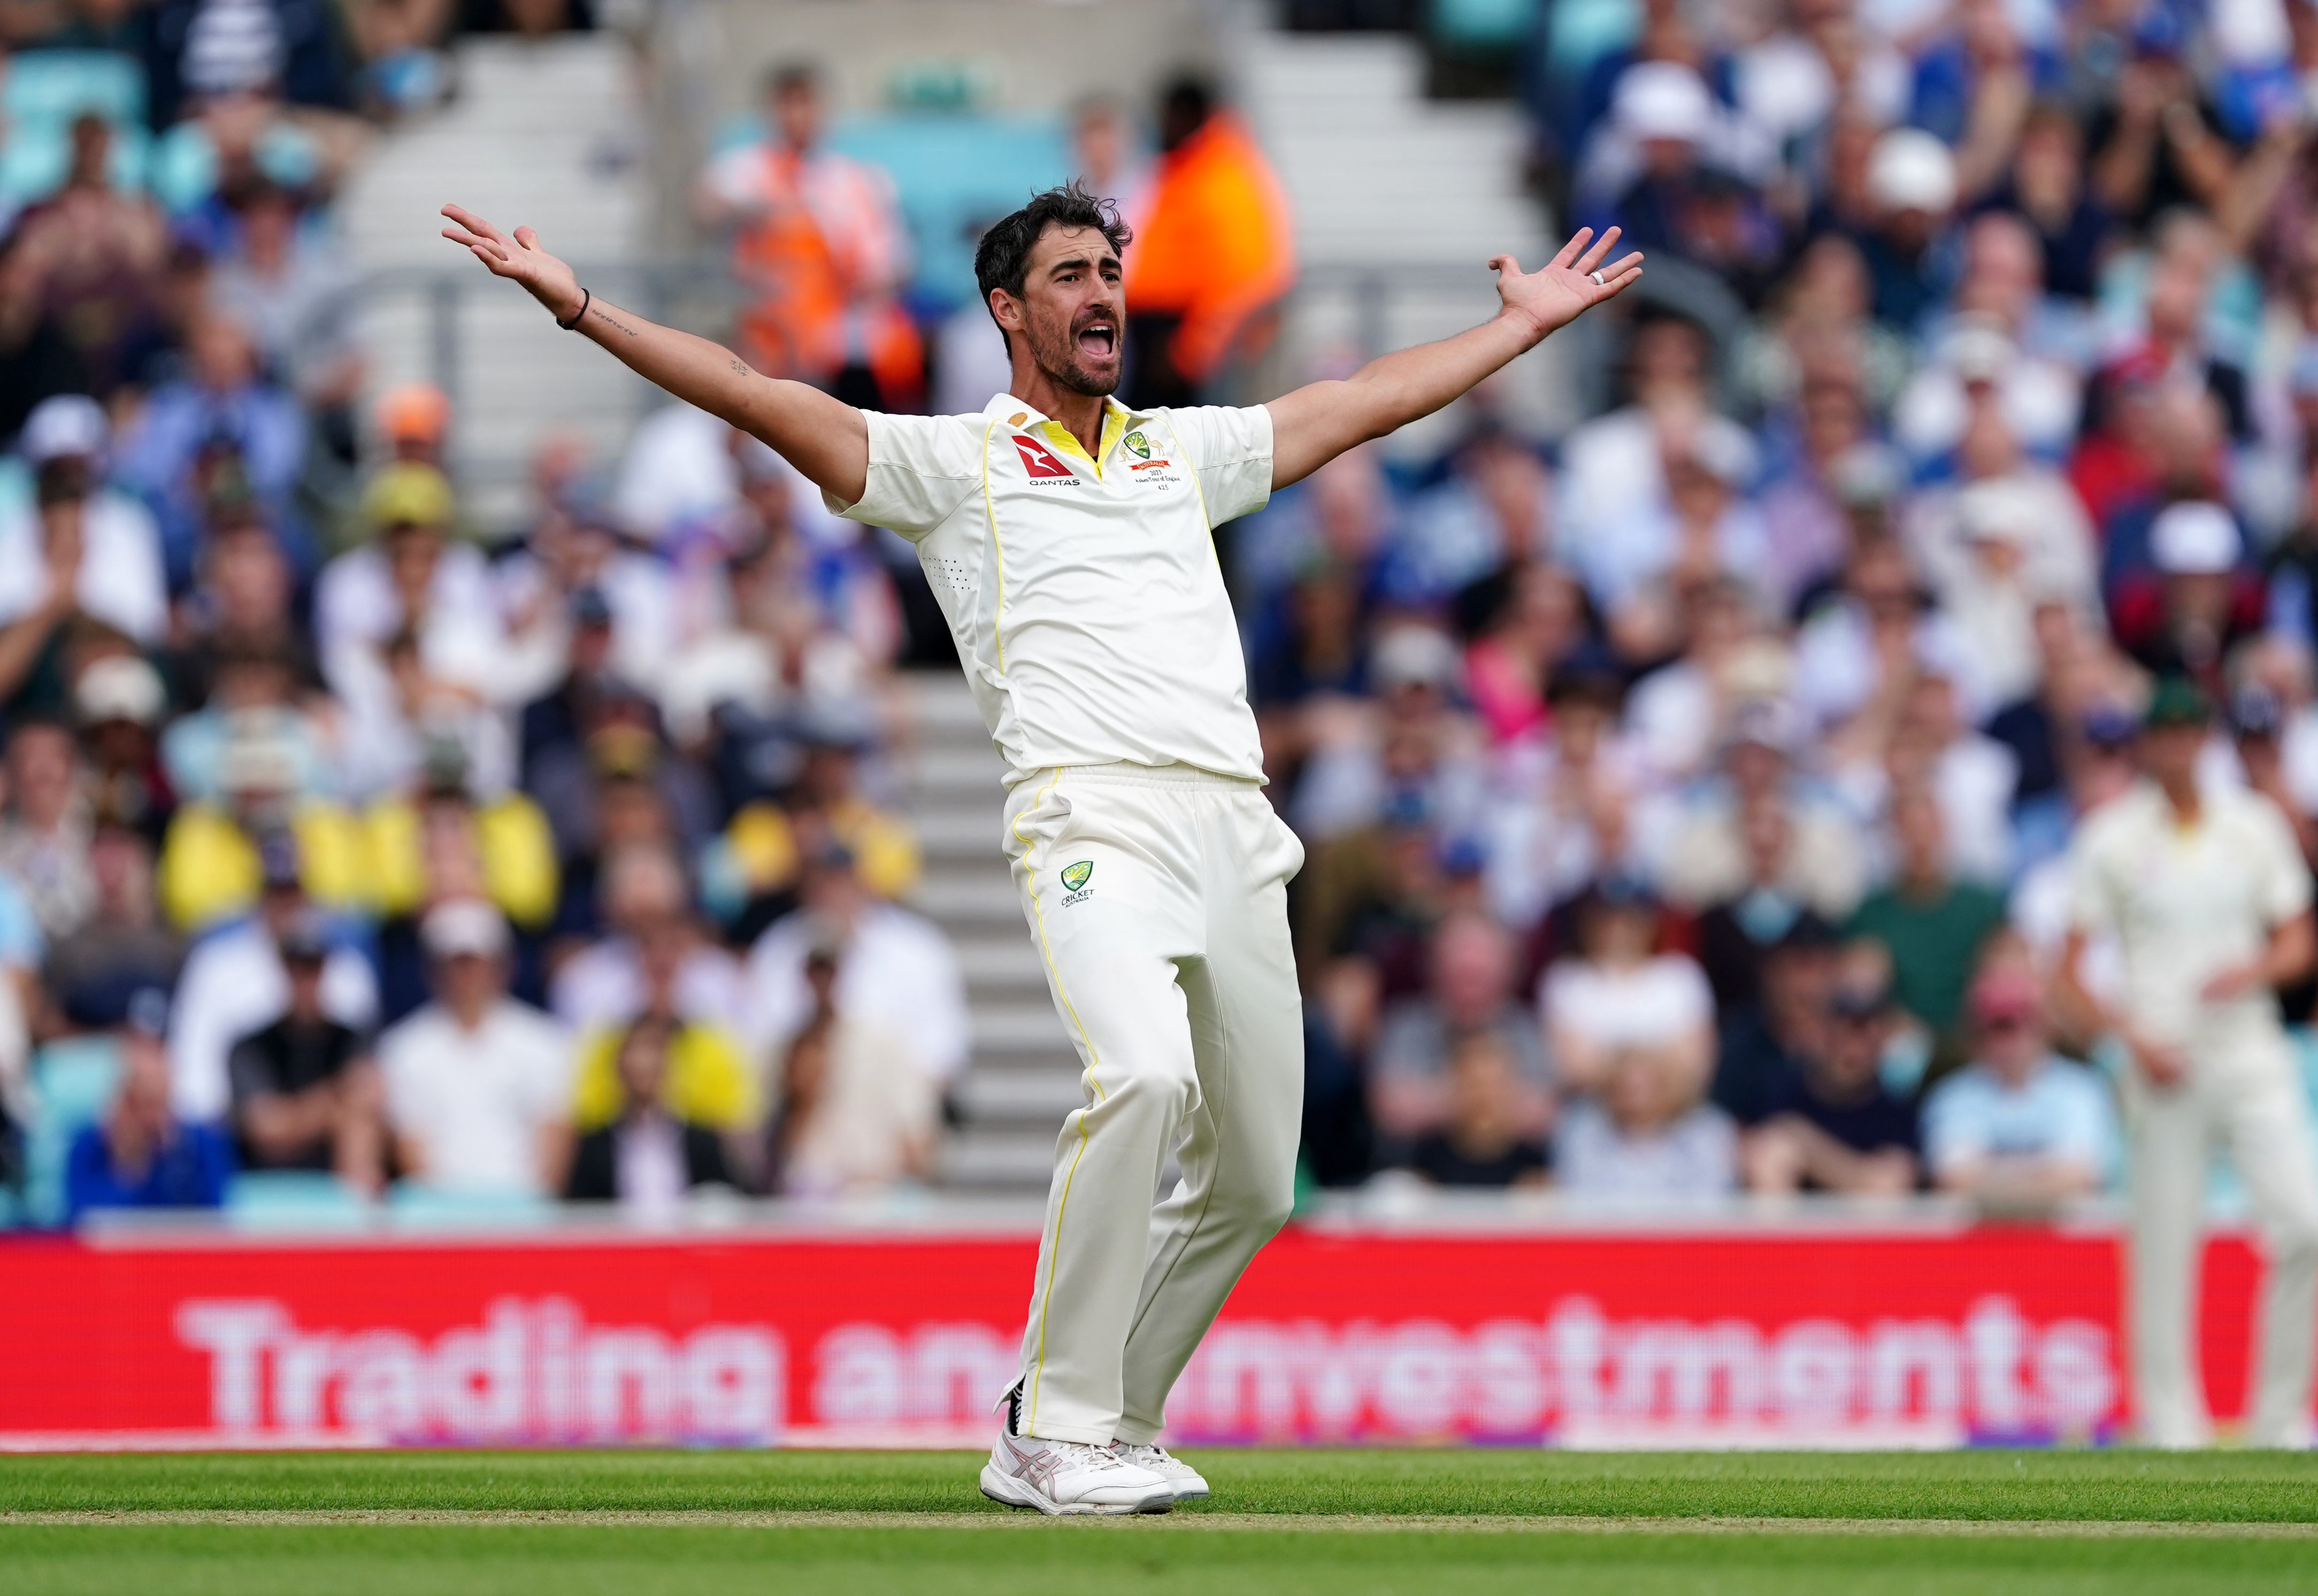 Mitchell Starc has been an inspiration for Johnson as a left-arm quick.